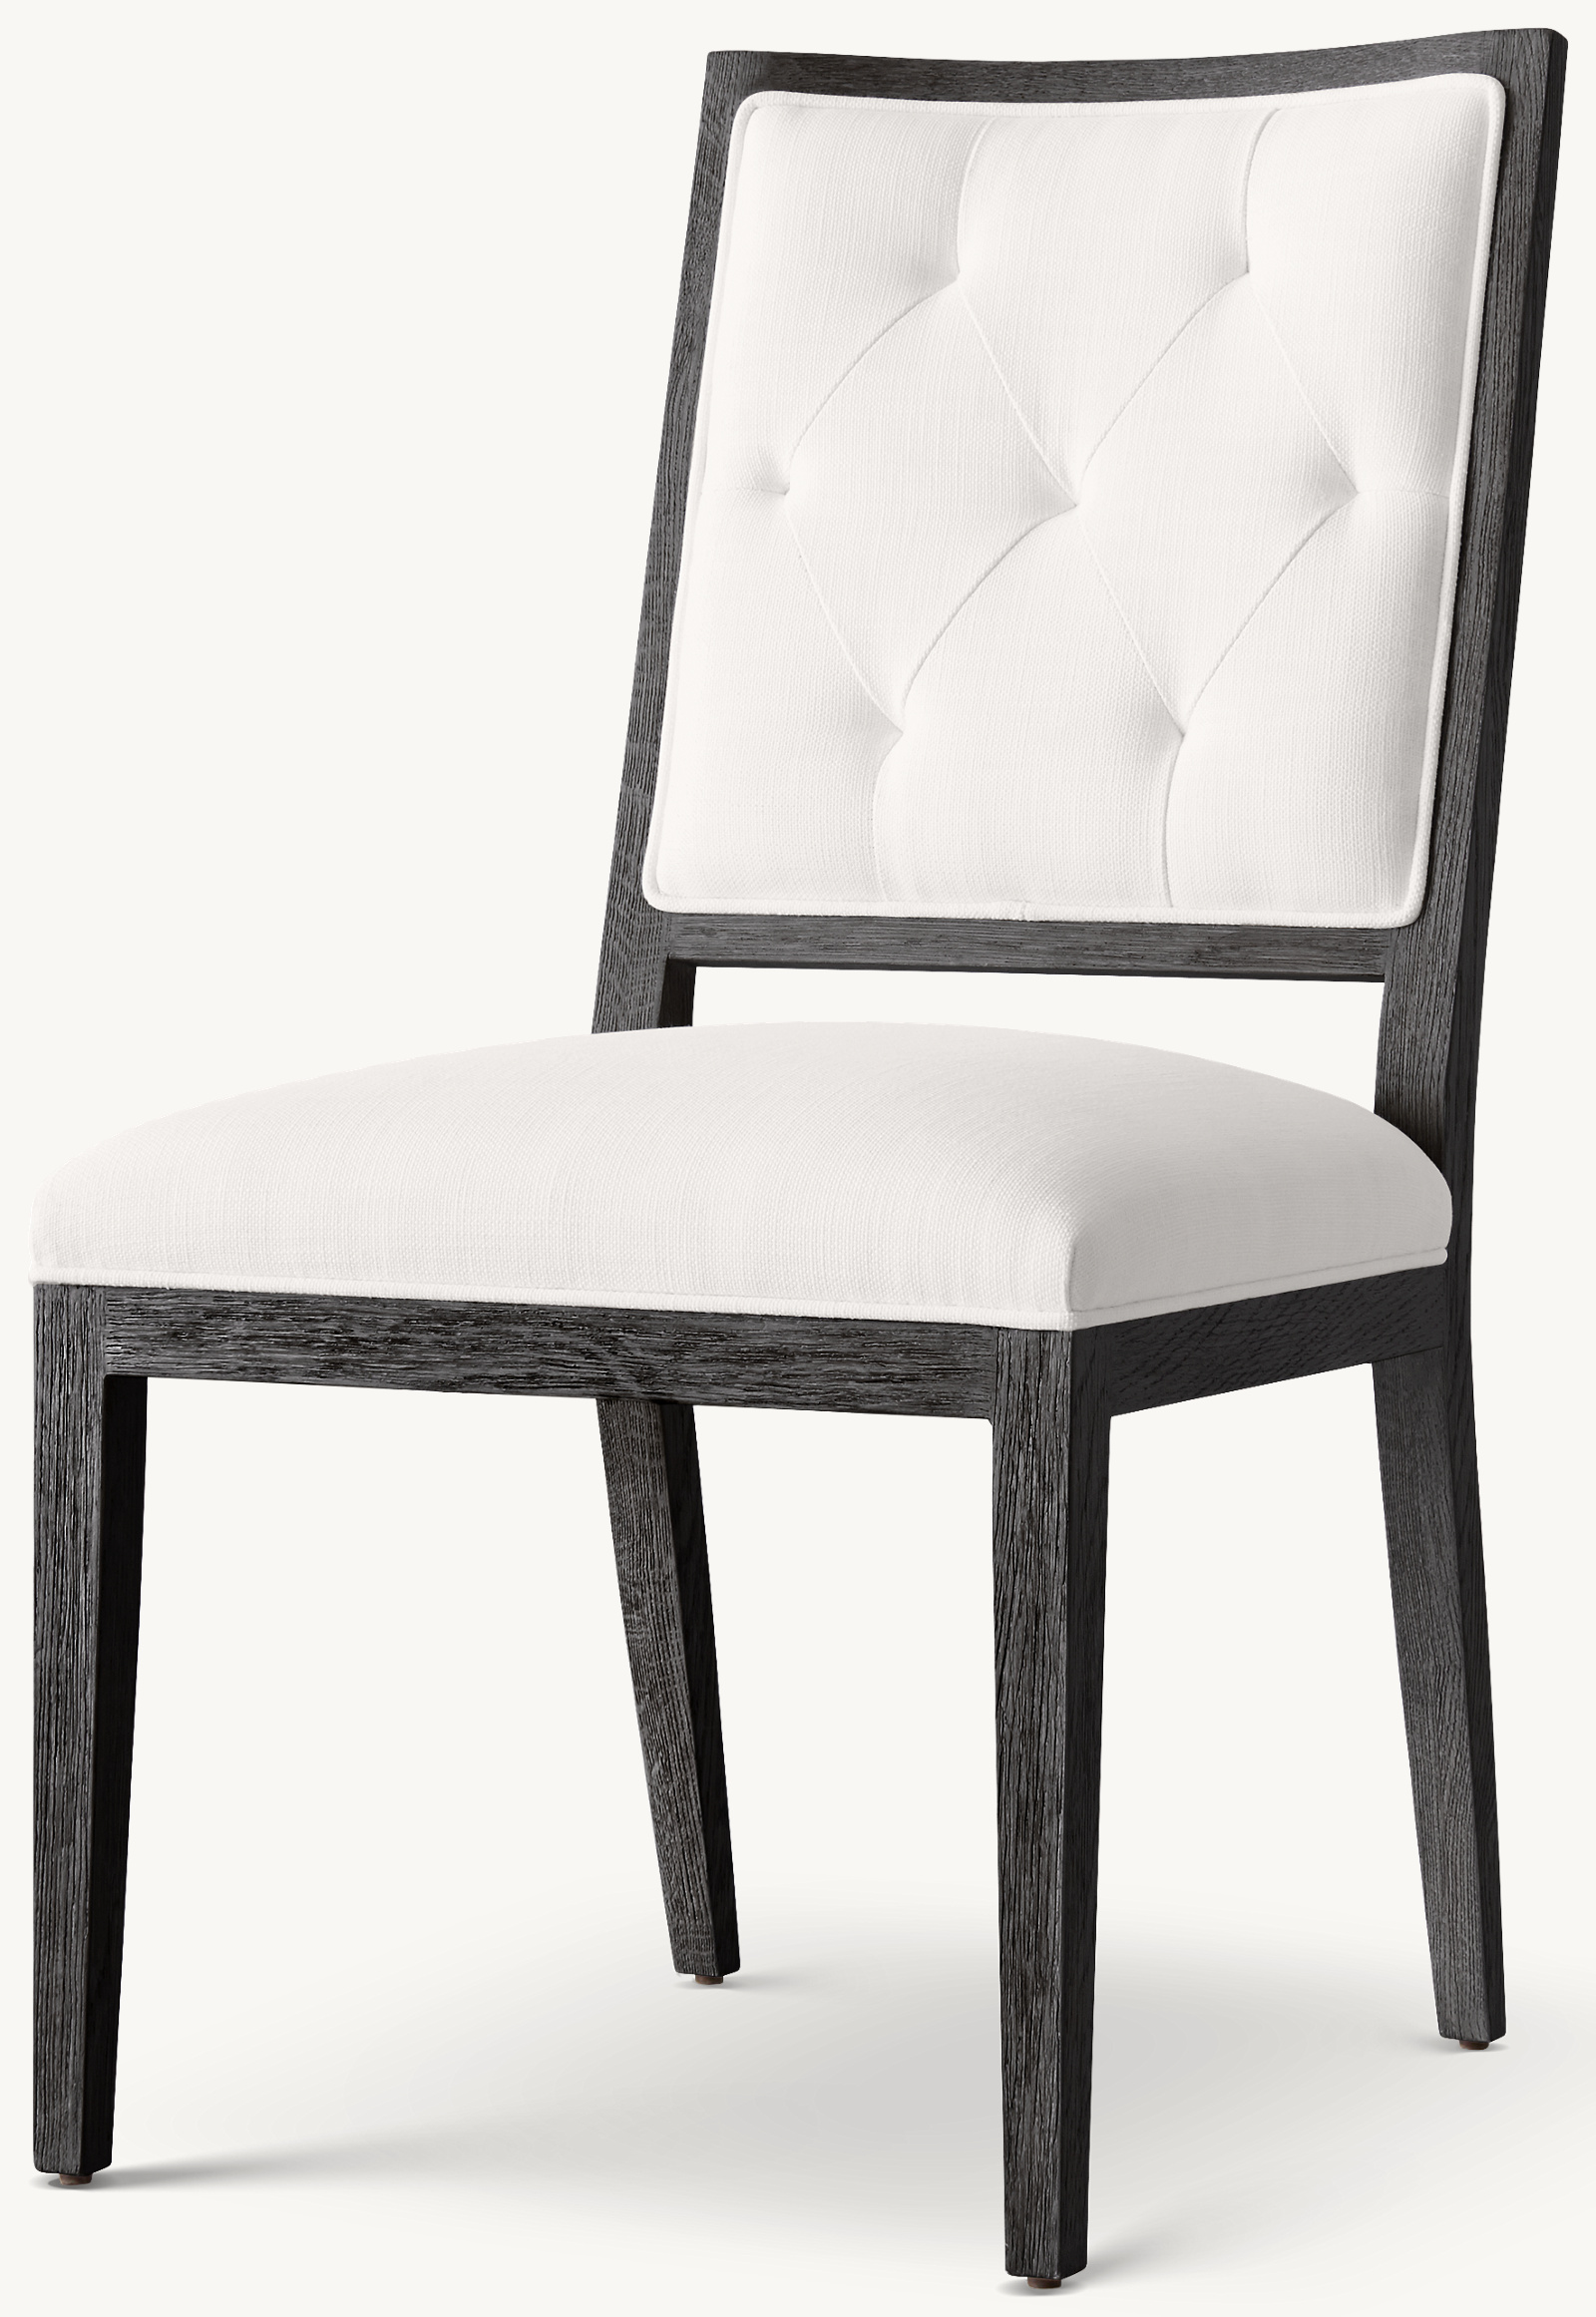 Shown in White Perennials&#174; Performance Textured Linen Weave with Black Oak finish.